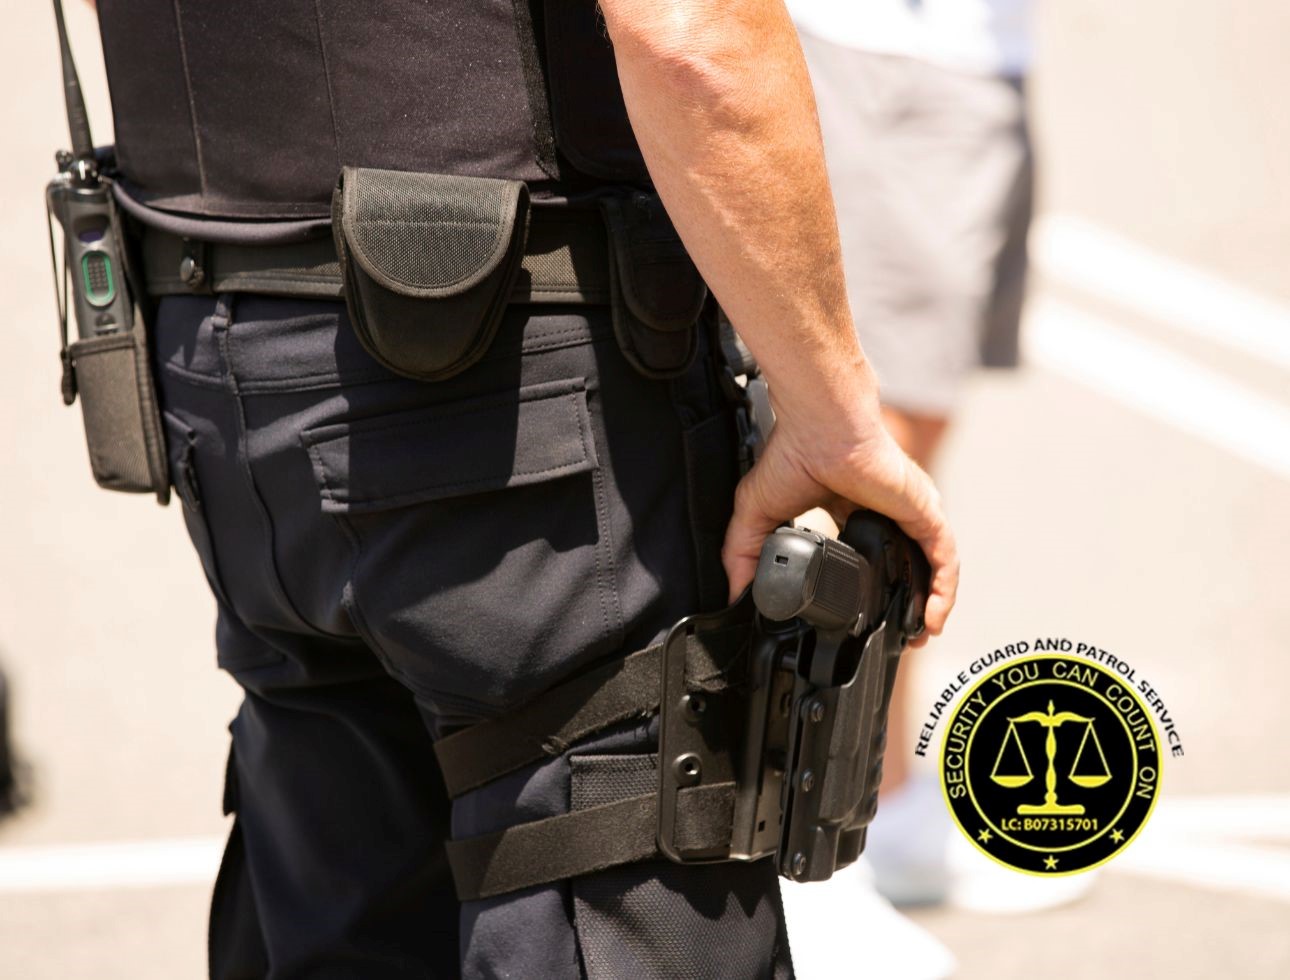 Advantages and disadvantages of armed security guards